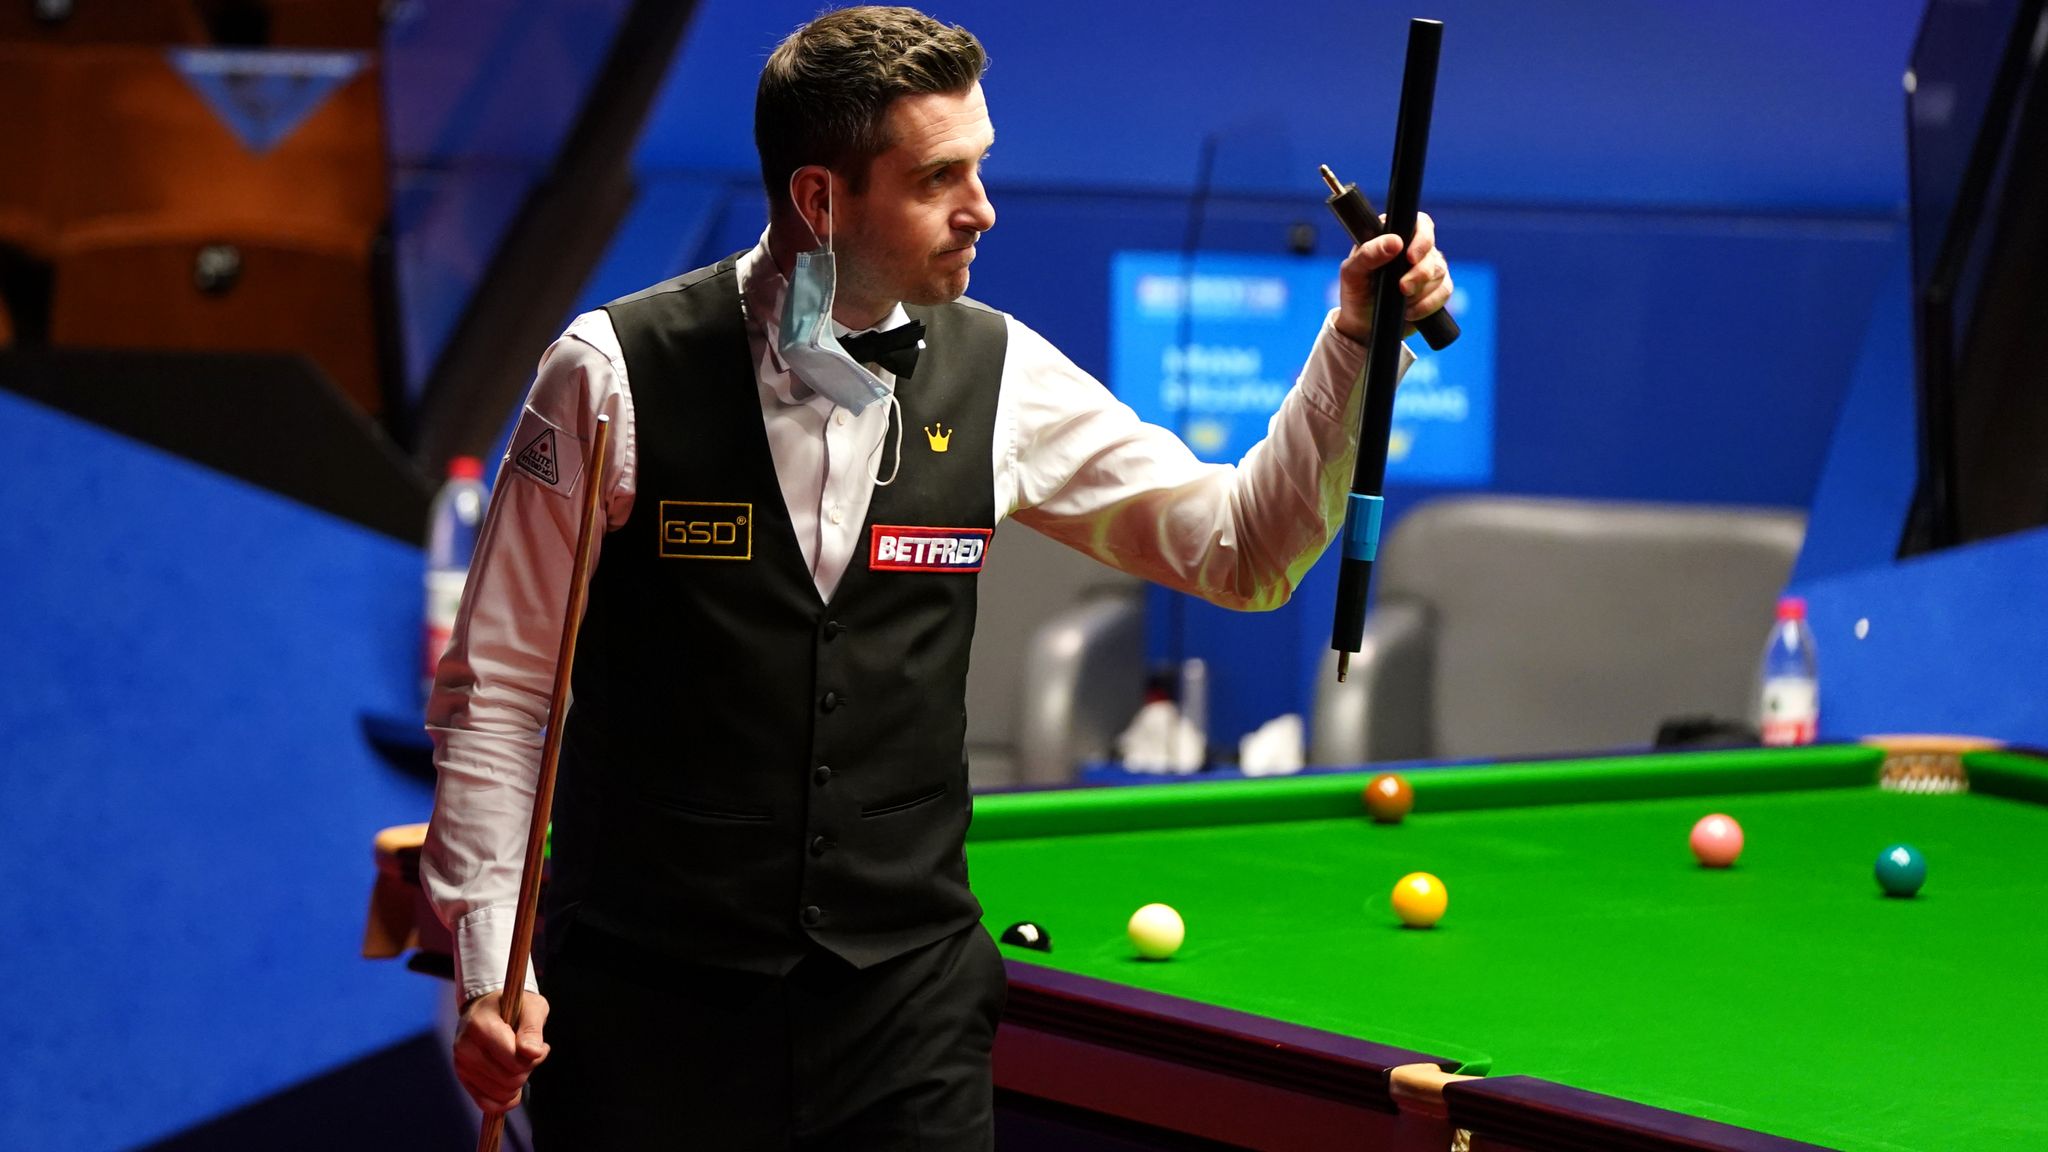 World Snooker Championship Kyren Wilson and Mark Selby through to semi- finals at Crucible Snooker News Sky Sports